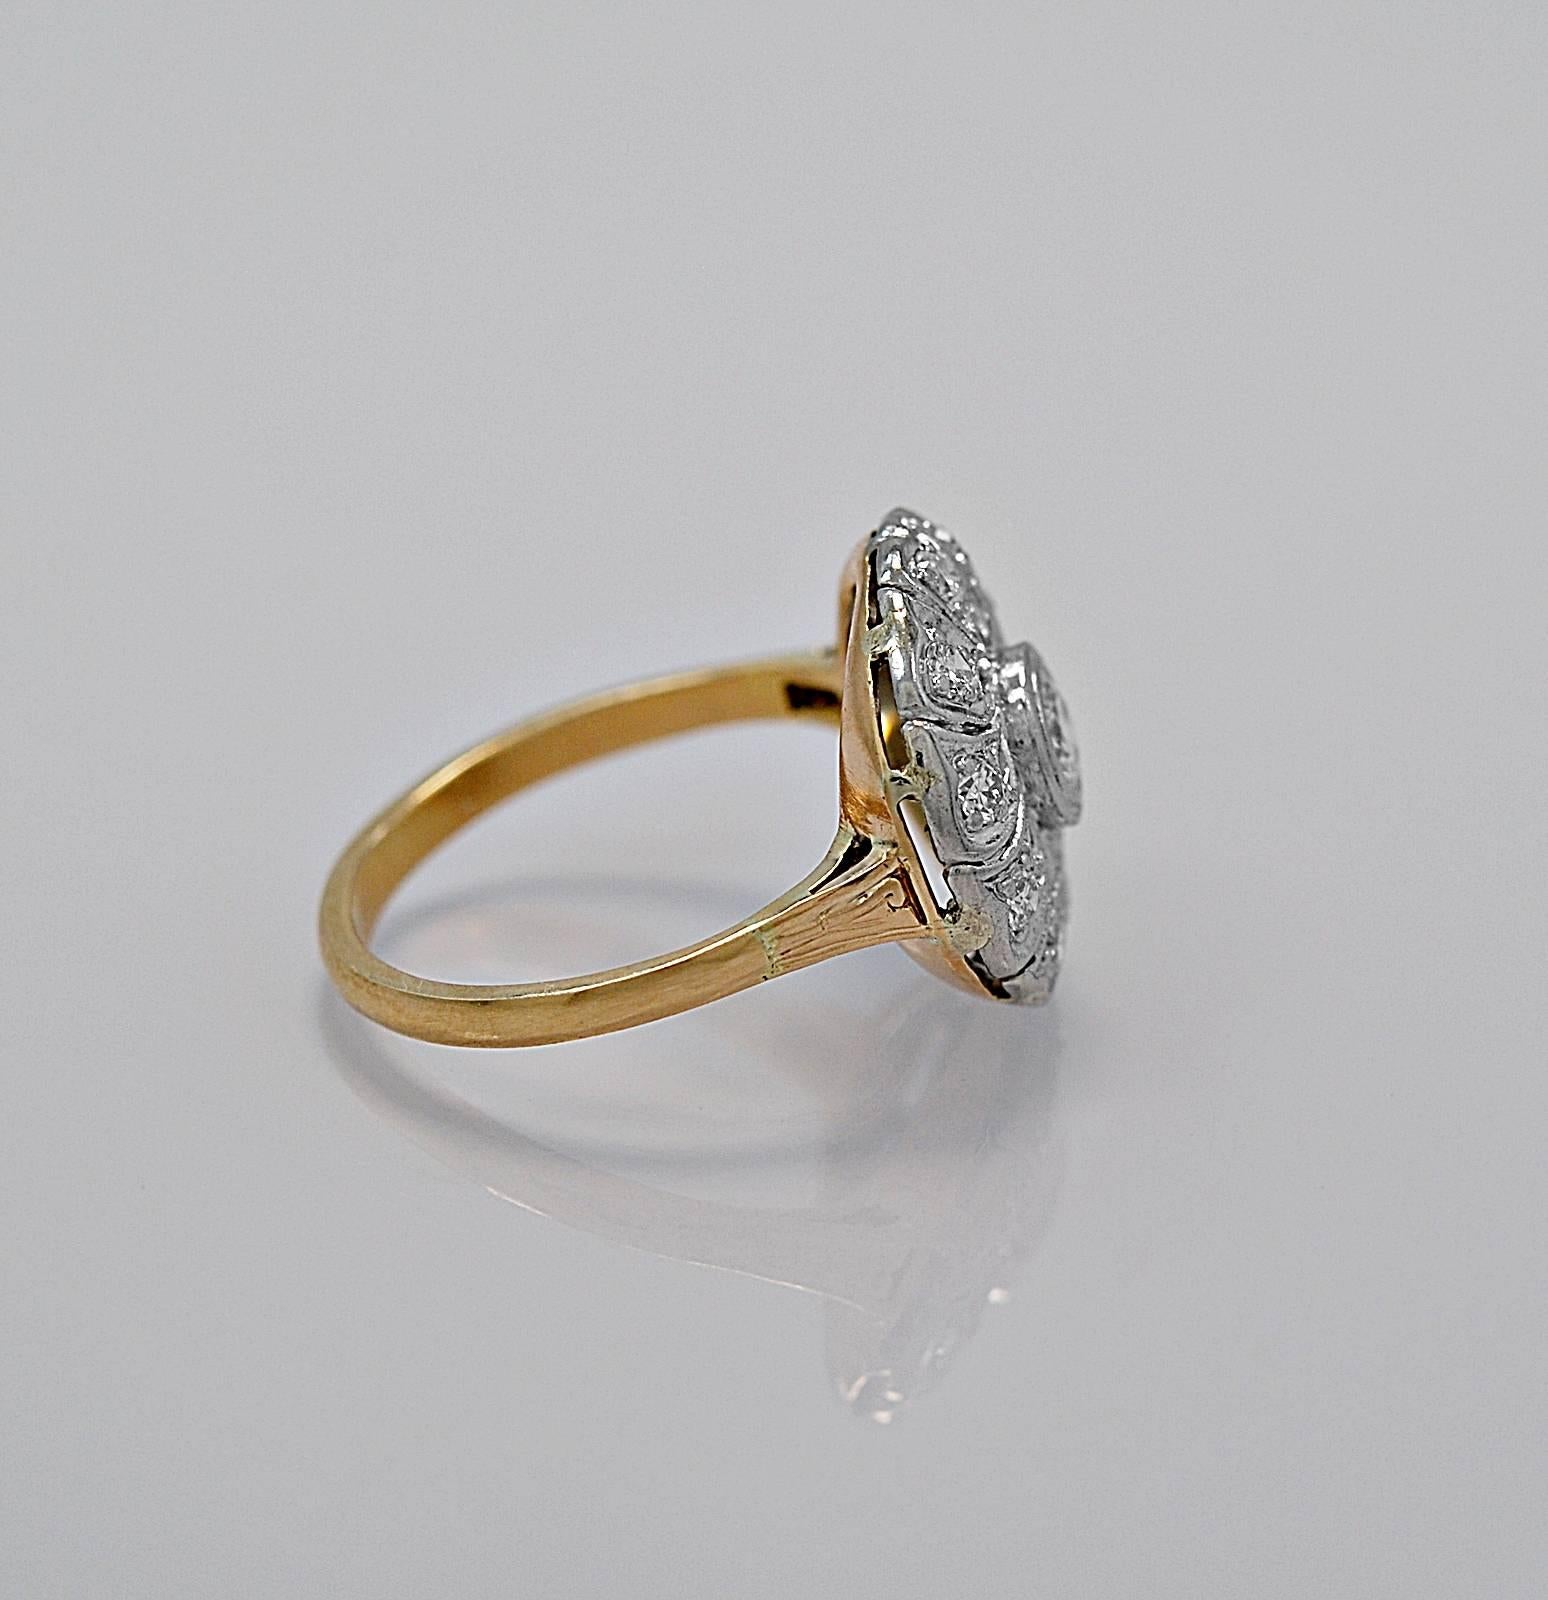 An artistically designed antique fashion ring featuring a .15ct. apx. center diamond with .20ct. apx. T.W. of diamond melee surrounding the edge of the round decorated disc head. It is beautifully crafted and finely finished. The two tone look with